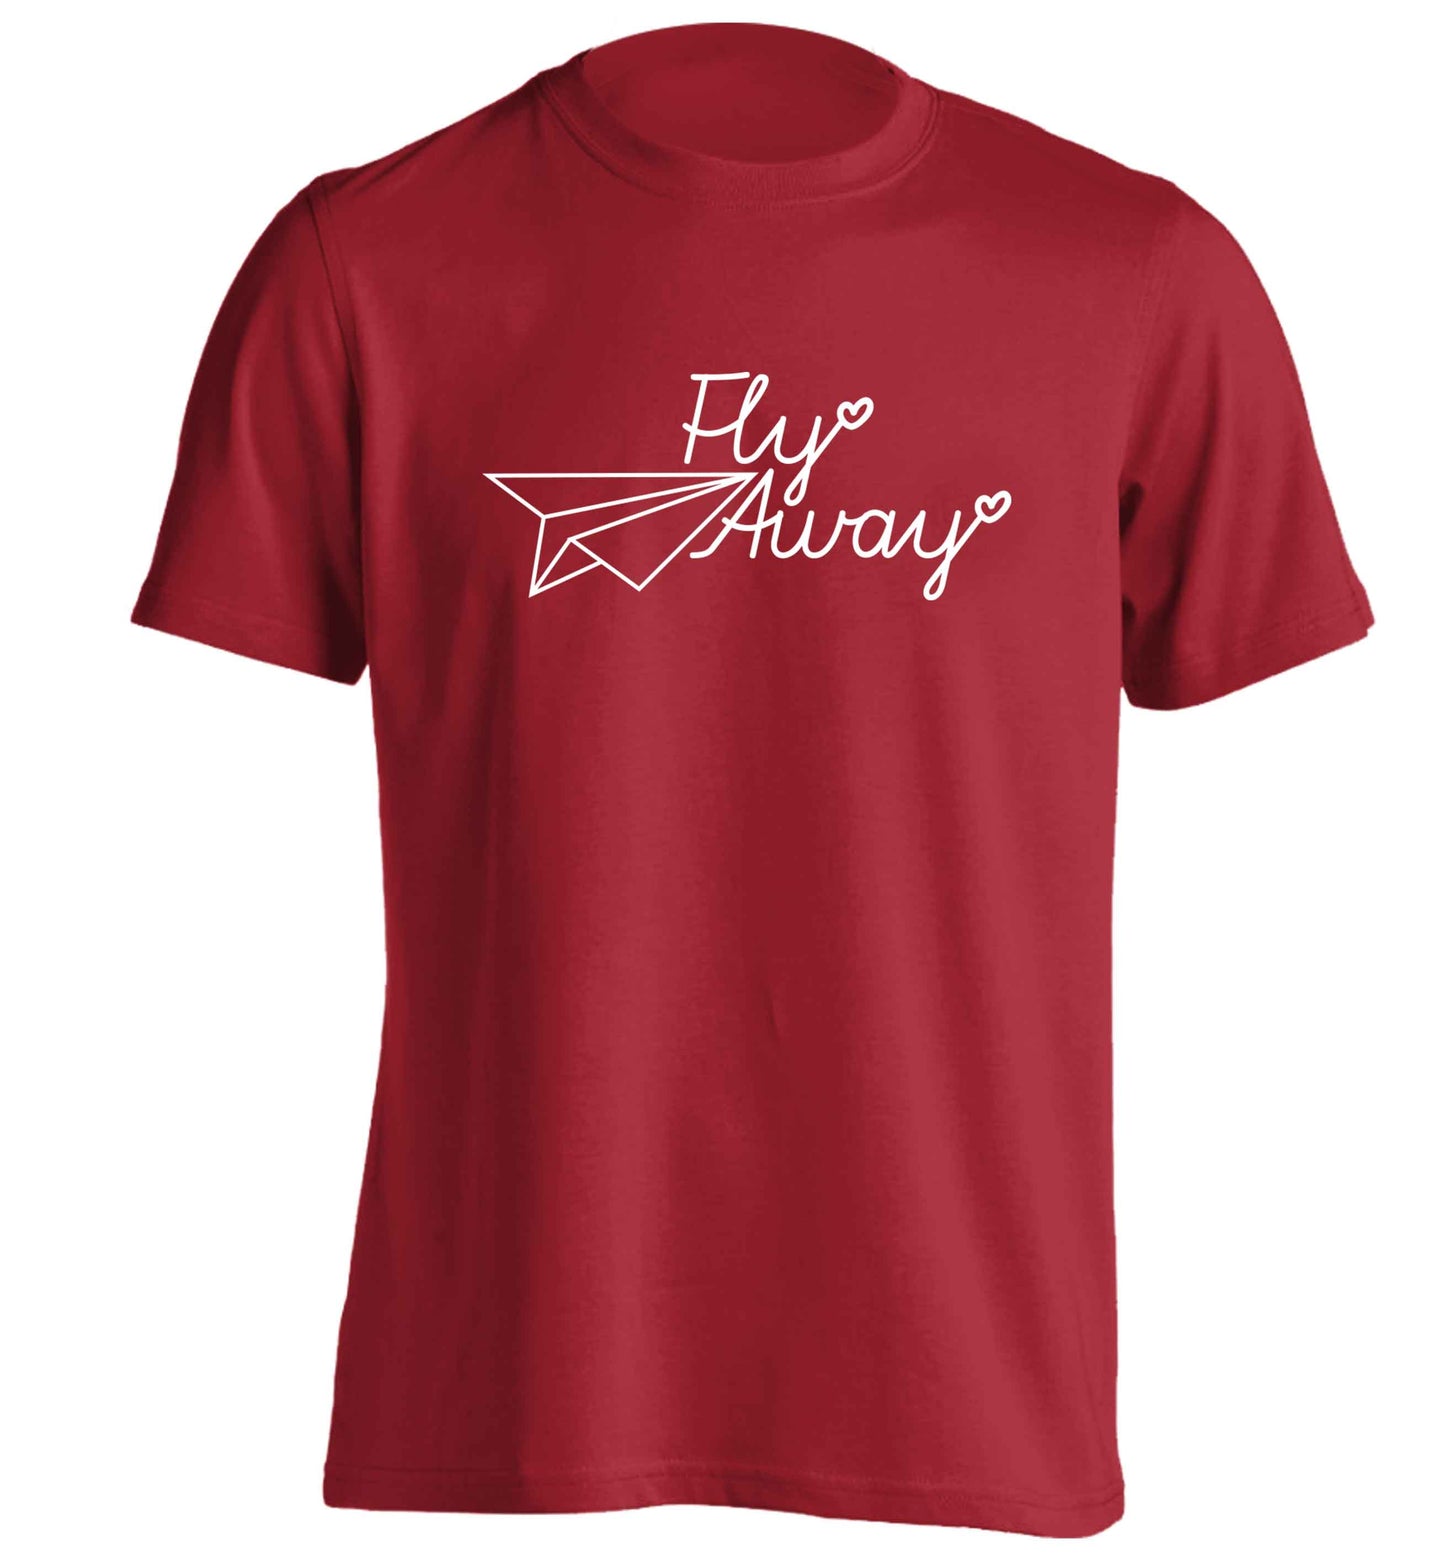 Fly away adults unisex red Tshirt 2XL